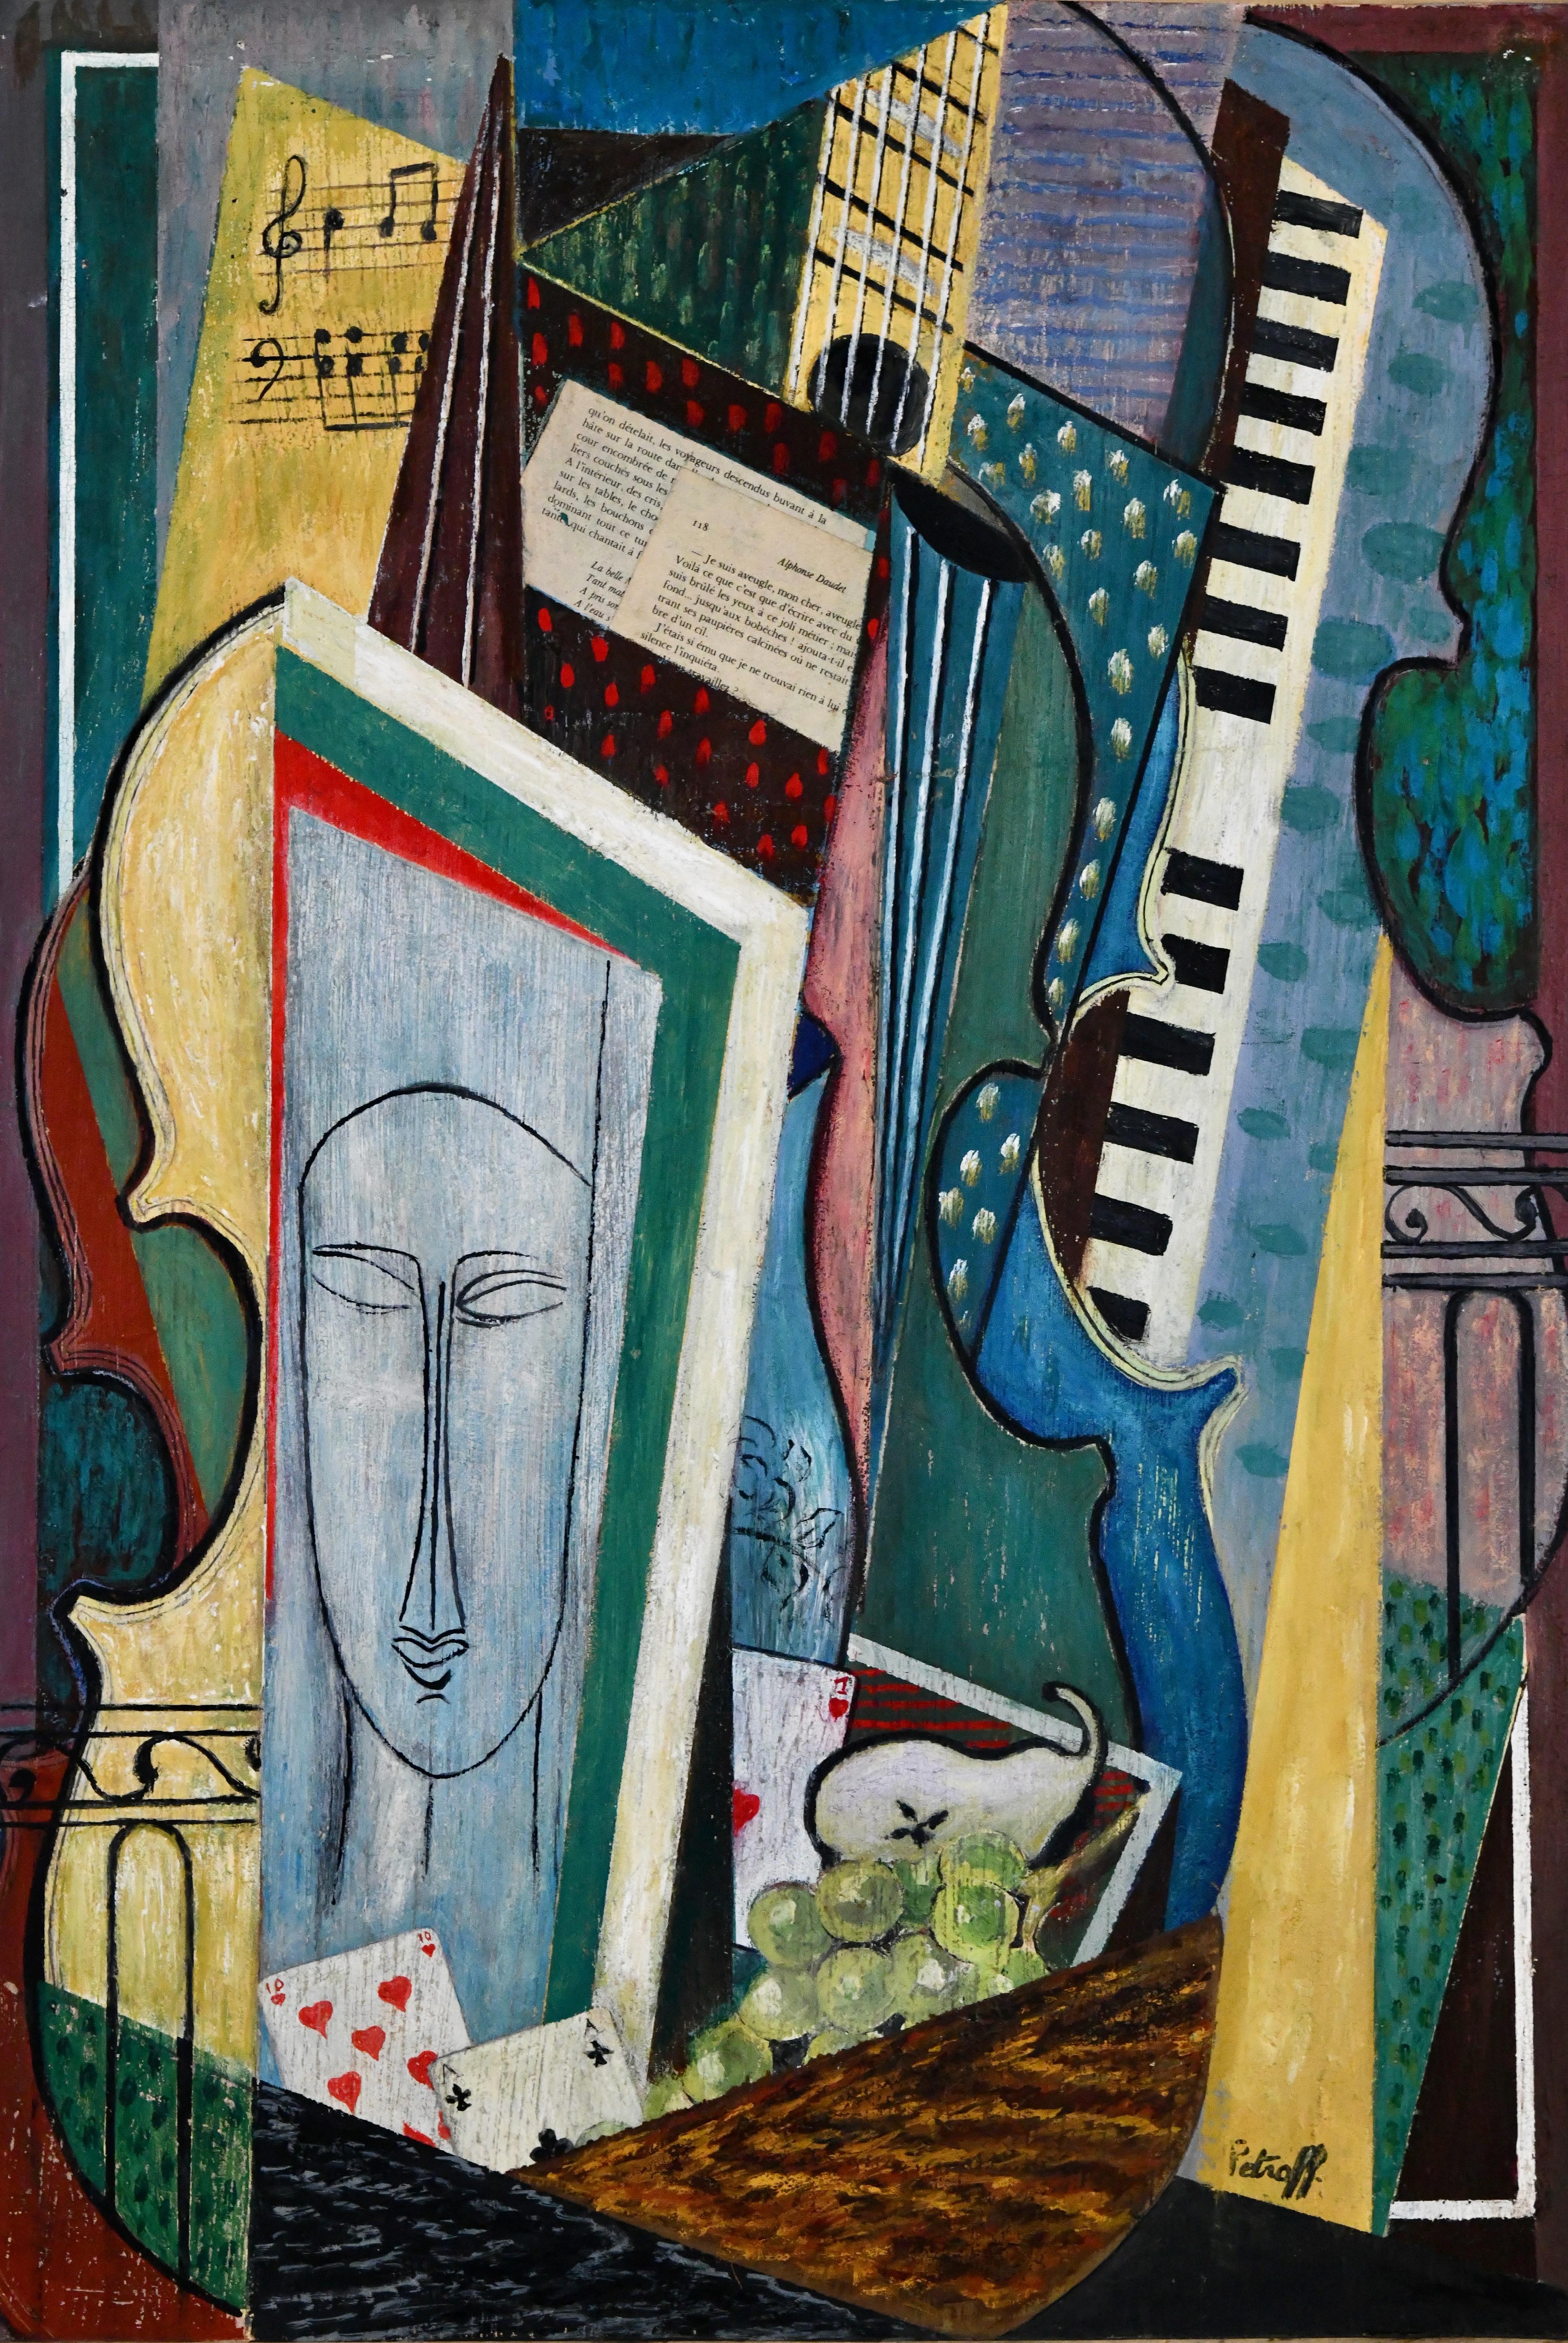 Painting cubist composition with Modigliani face, musical instruments, playing cards and fruit by the Russian artist Petroff. 
Oil on board, framed. 

Size of the painting:
H. 73 cm x 50 cm.
H. 29 inch x 20 inch.